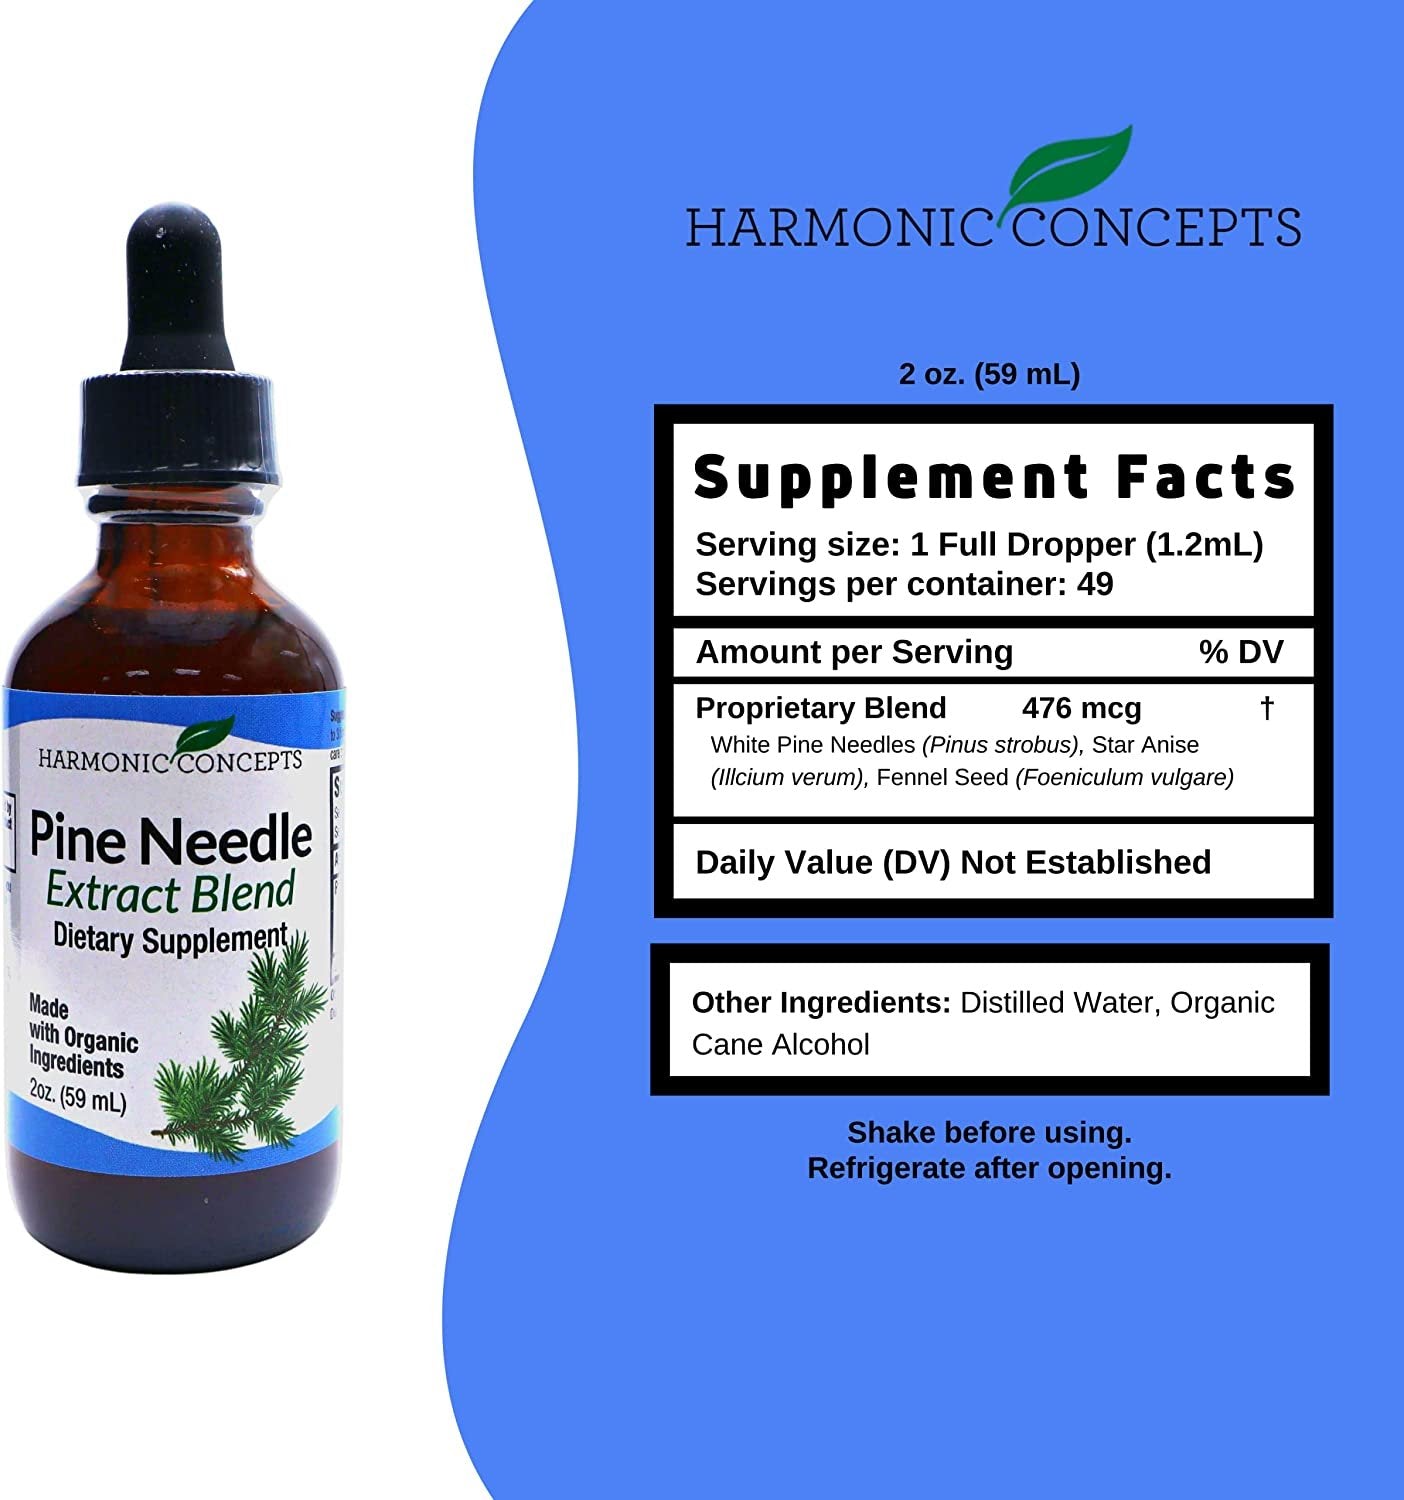 Harmonic Concepts Pine Needle Extract Blend - Organic Liquid Dietary Supplement - Vitamin A and Vitamin C - Immune Support Supplement - 2 Oz with Worldwide Nutrition Multi Purpose Key Chain